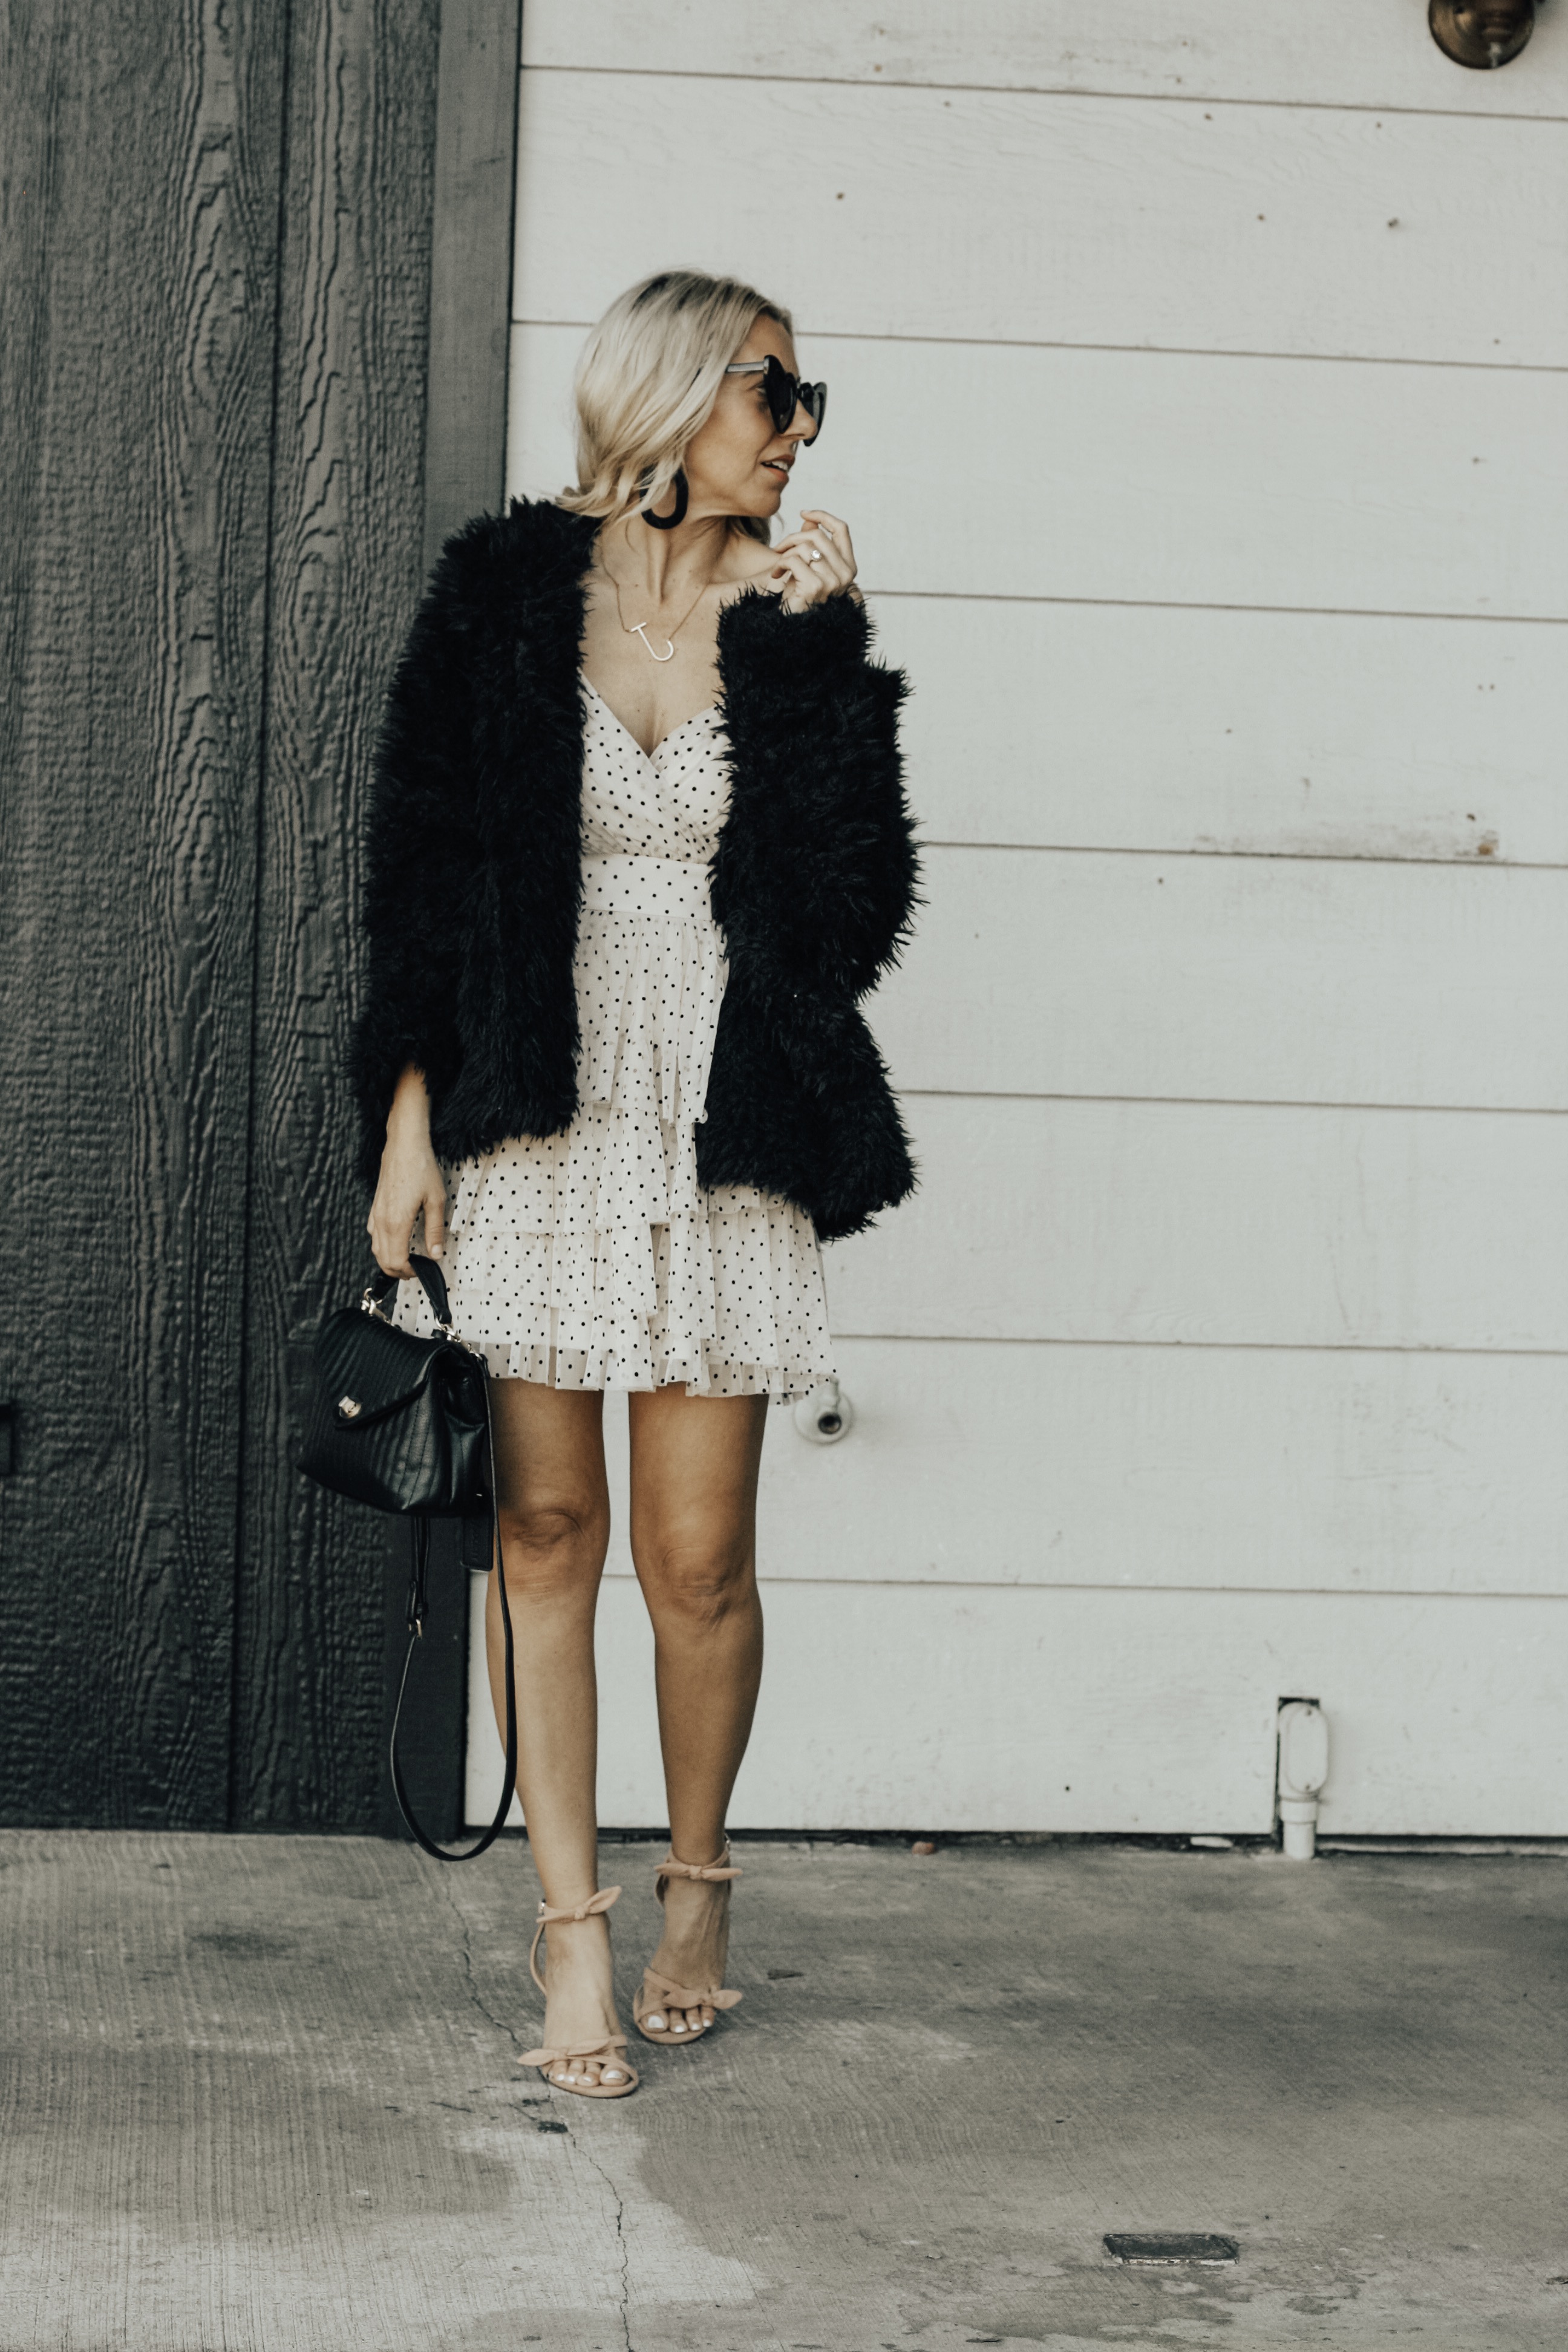 TWO VALENTINE'S DATE NIGHT LOOKS- Jaclyn De Leon Style + heard midi dress + black and white outfit + Valentine outfit inspo + asos + black booties + heart sunglasses + striped handbag + ruffle dot baby doll dress + abercrombie + faux fur jacket + stilettos + girls night out + dress up + spring street style